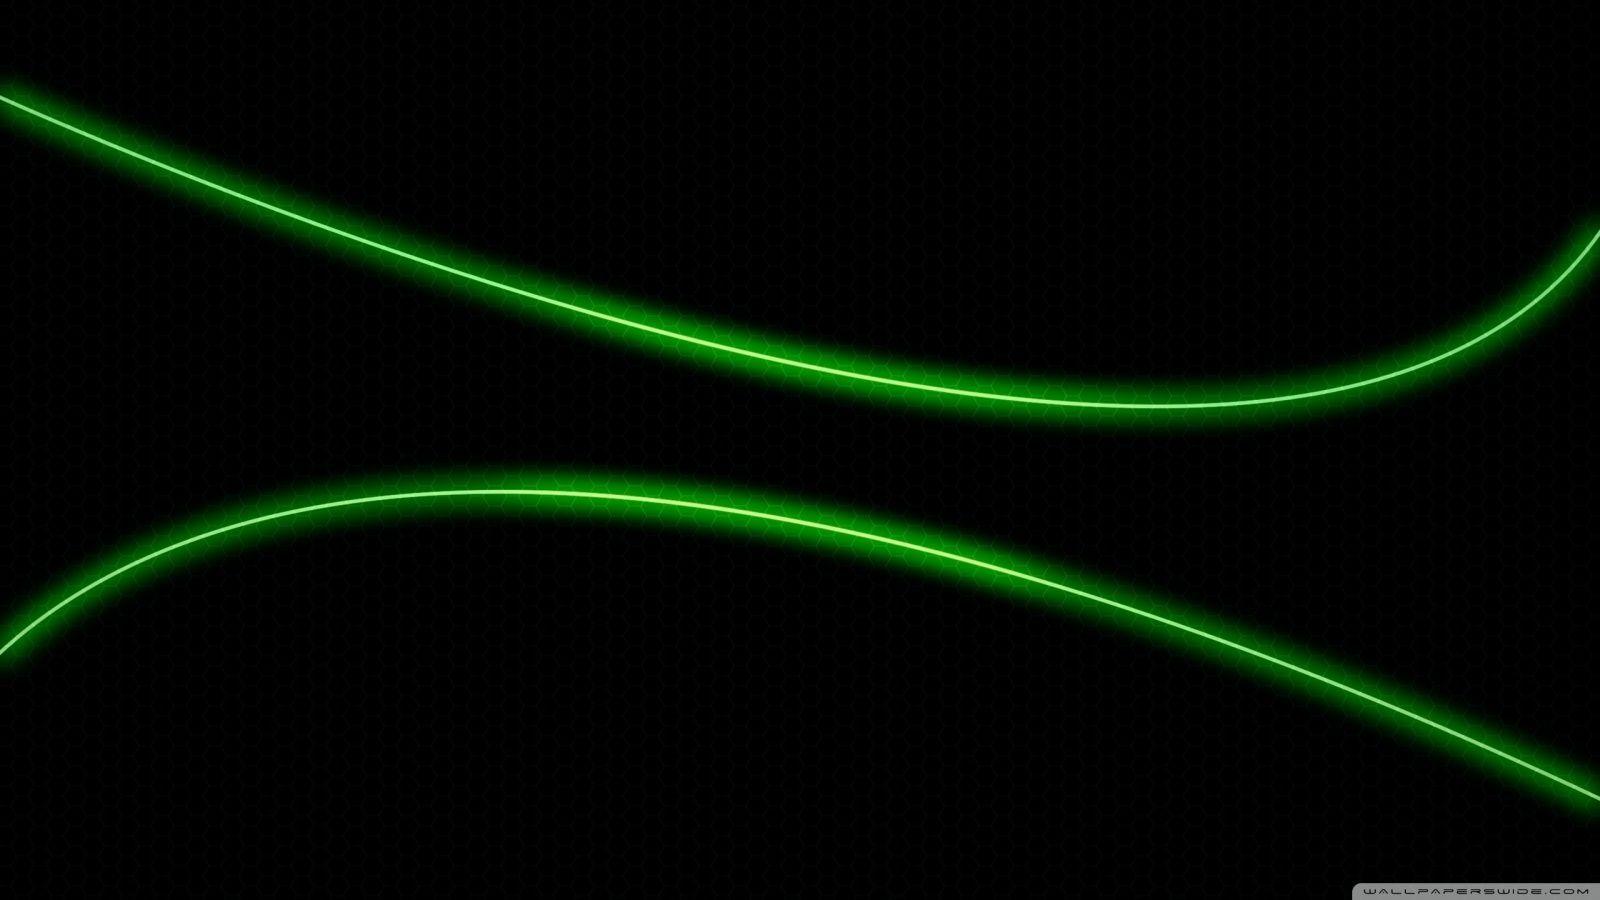 Black And Neon Green Backgrounds Hd Image 3 HD Wallpapers